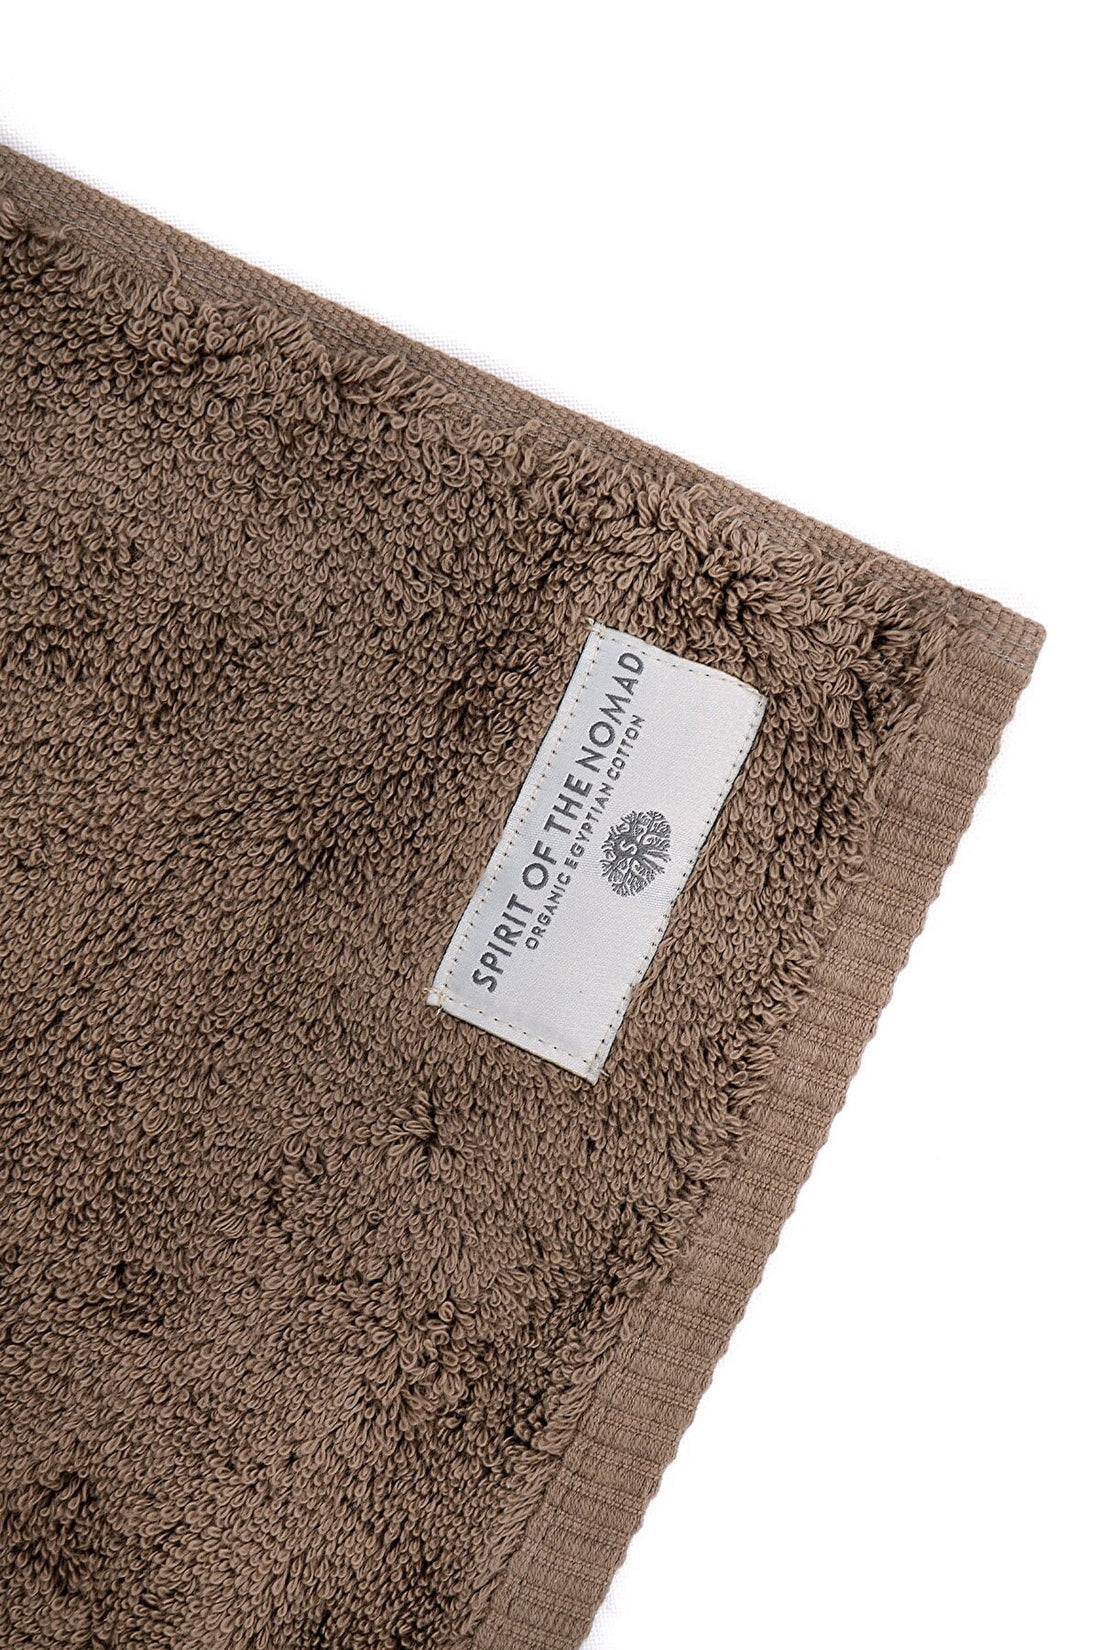 Egyptian Cotton Hand and Head Towel 50x70 cm